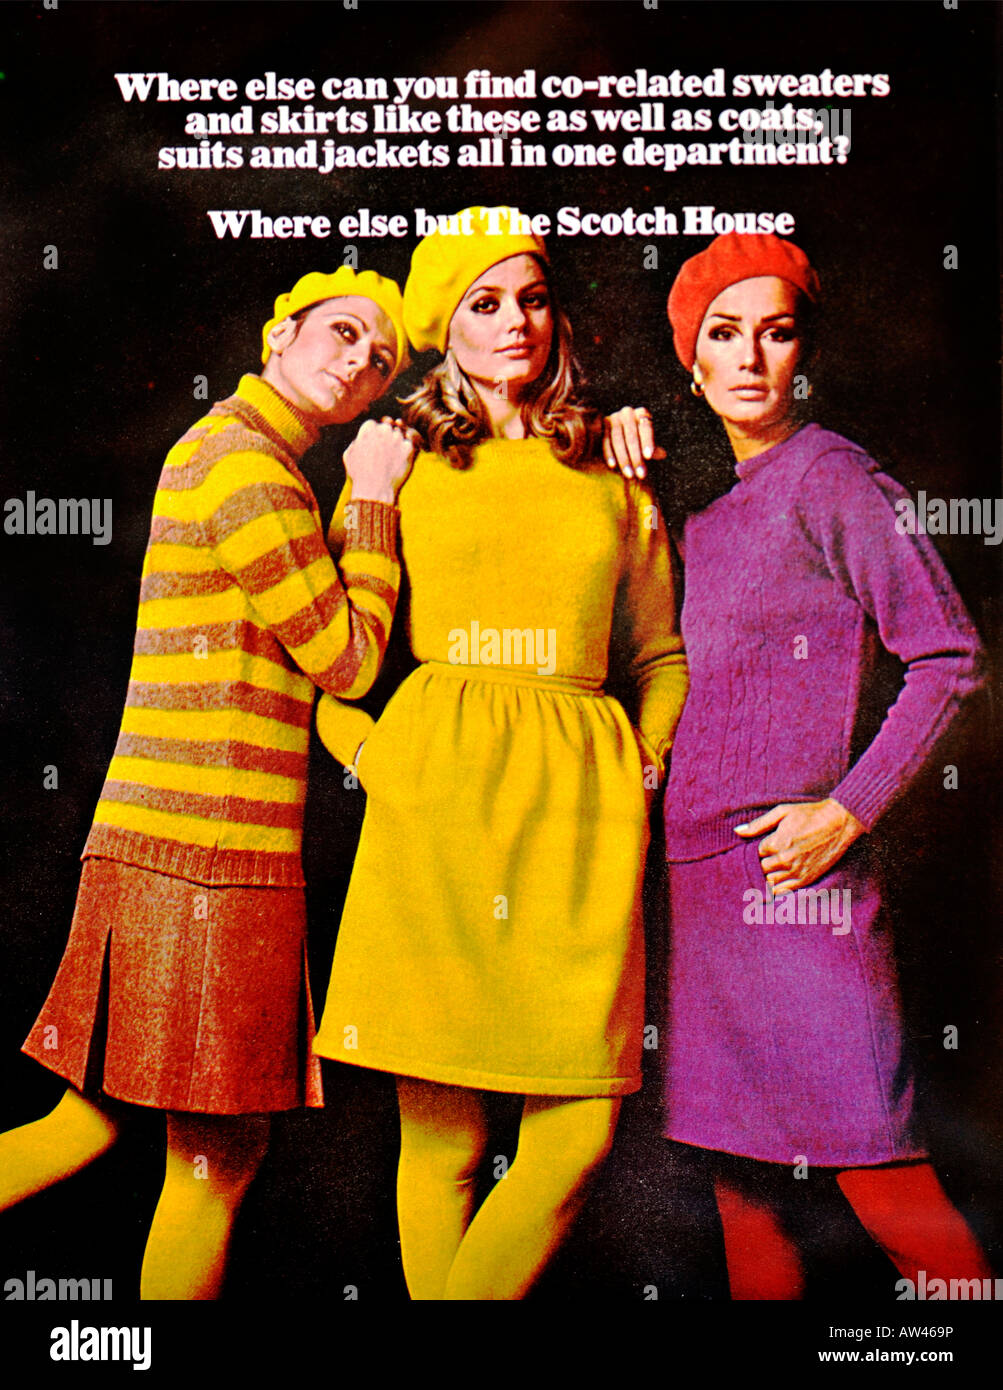 1960s Nova Magazine October 1968 Advertisement for The Scotch House Fashion Knightsbridge FOR EDITORIAL USE ONLY Stock Photo